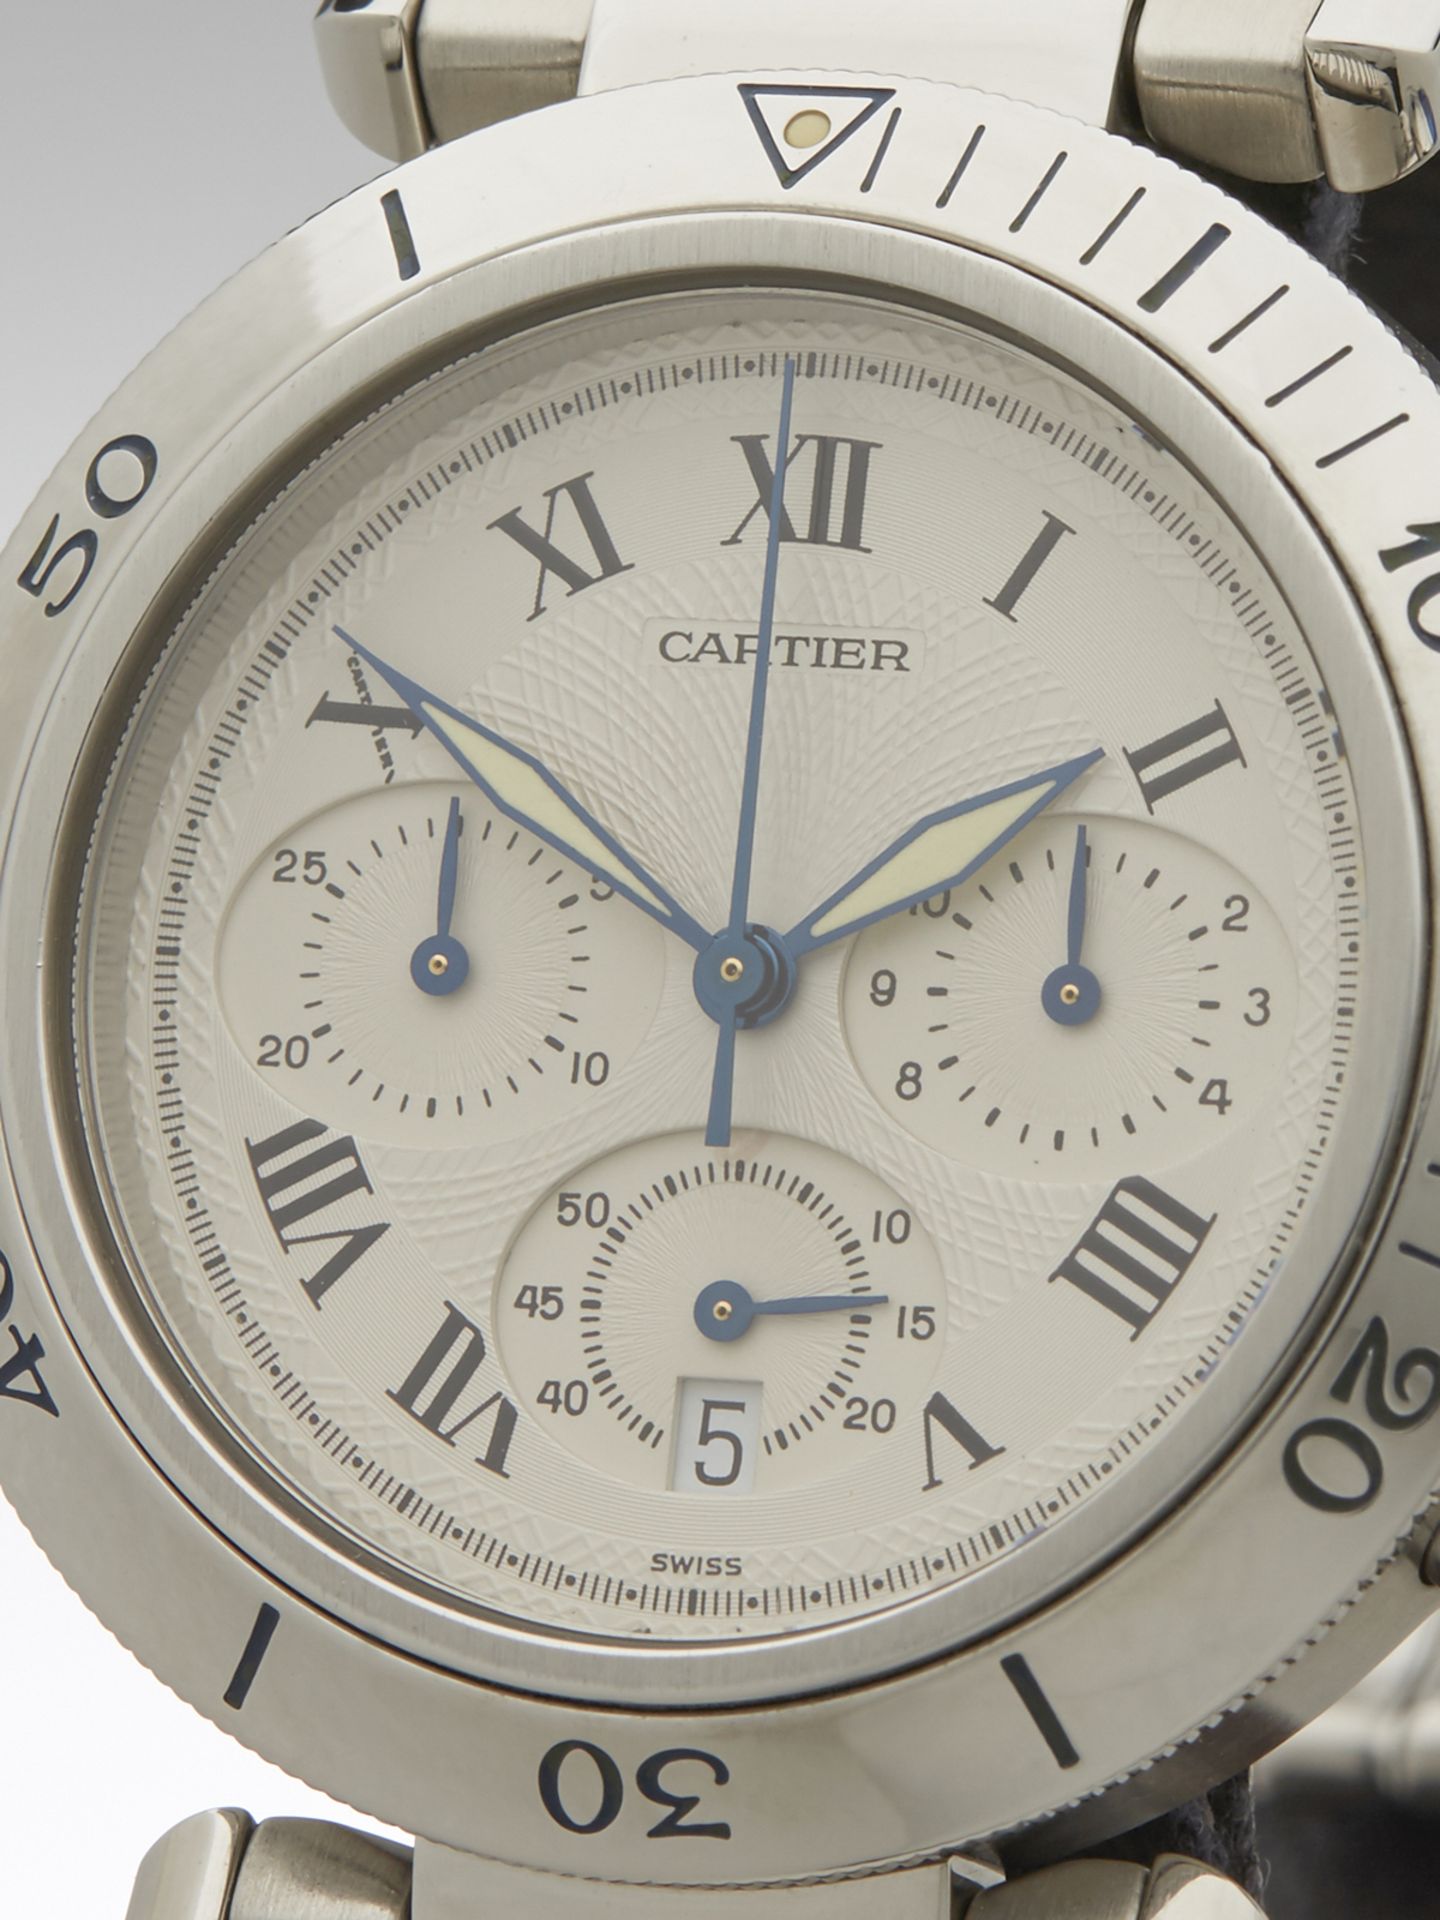 Cartier, Pasha Chronograph SS/SS 39mm Stainless Steel 1050 - Image 2 of 8